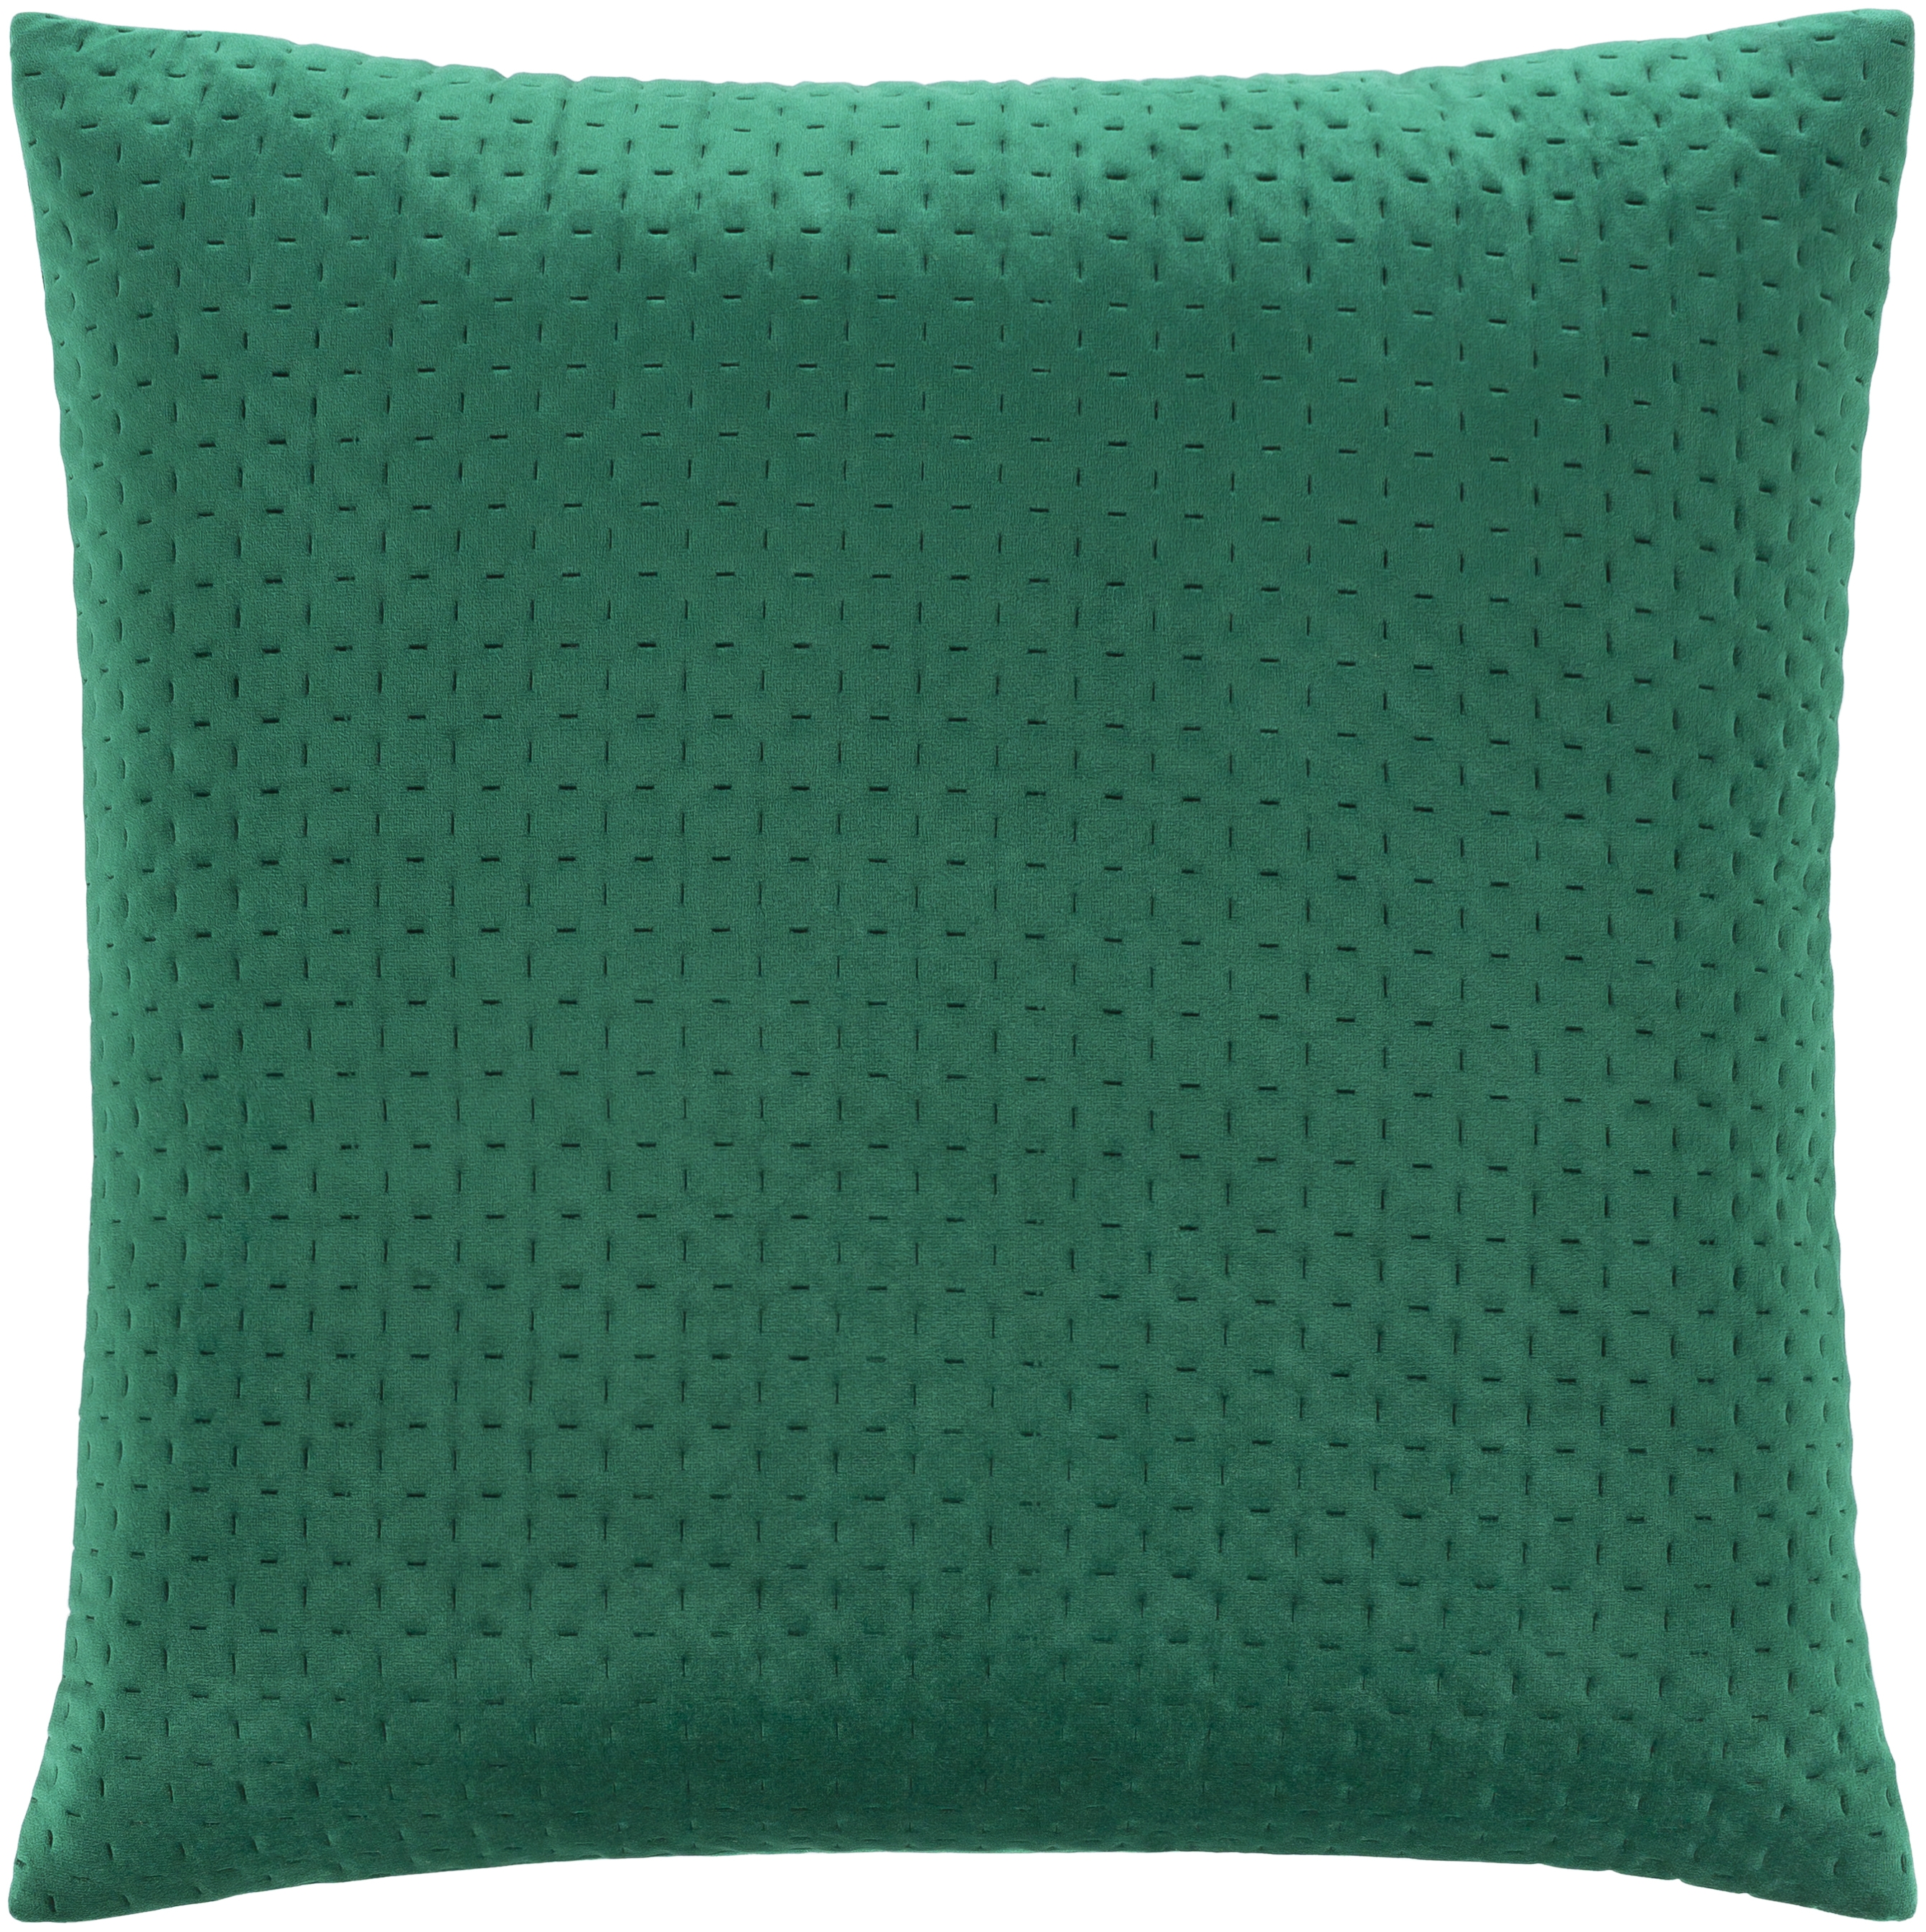 Calista Throw Pillow, 20" x 20", with down insert - Image 0